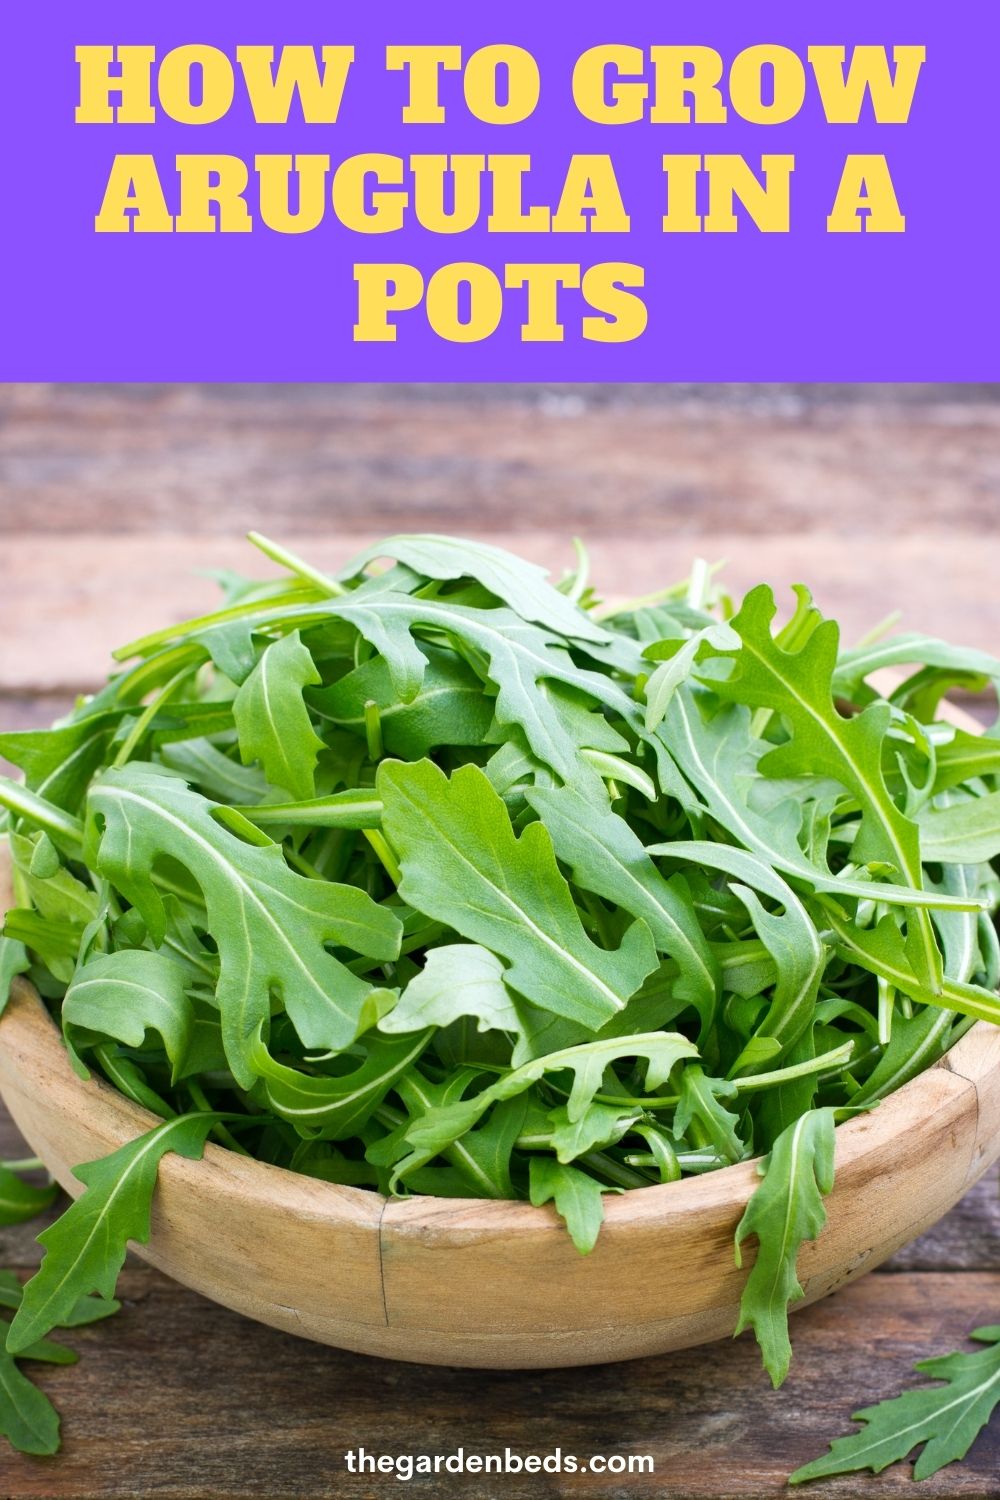 How To Grow Arugula In a Pots